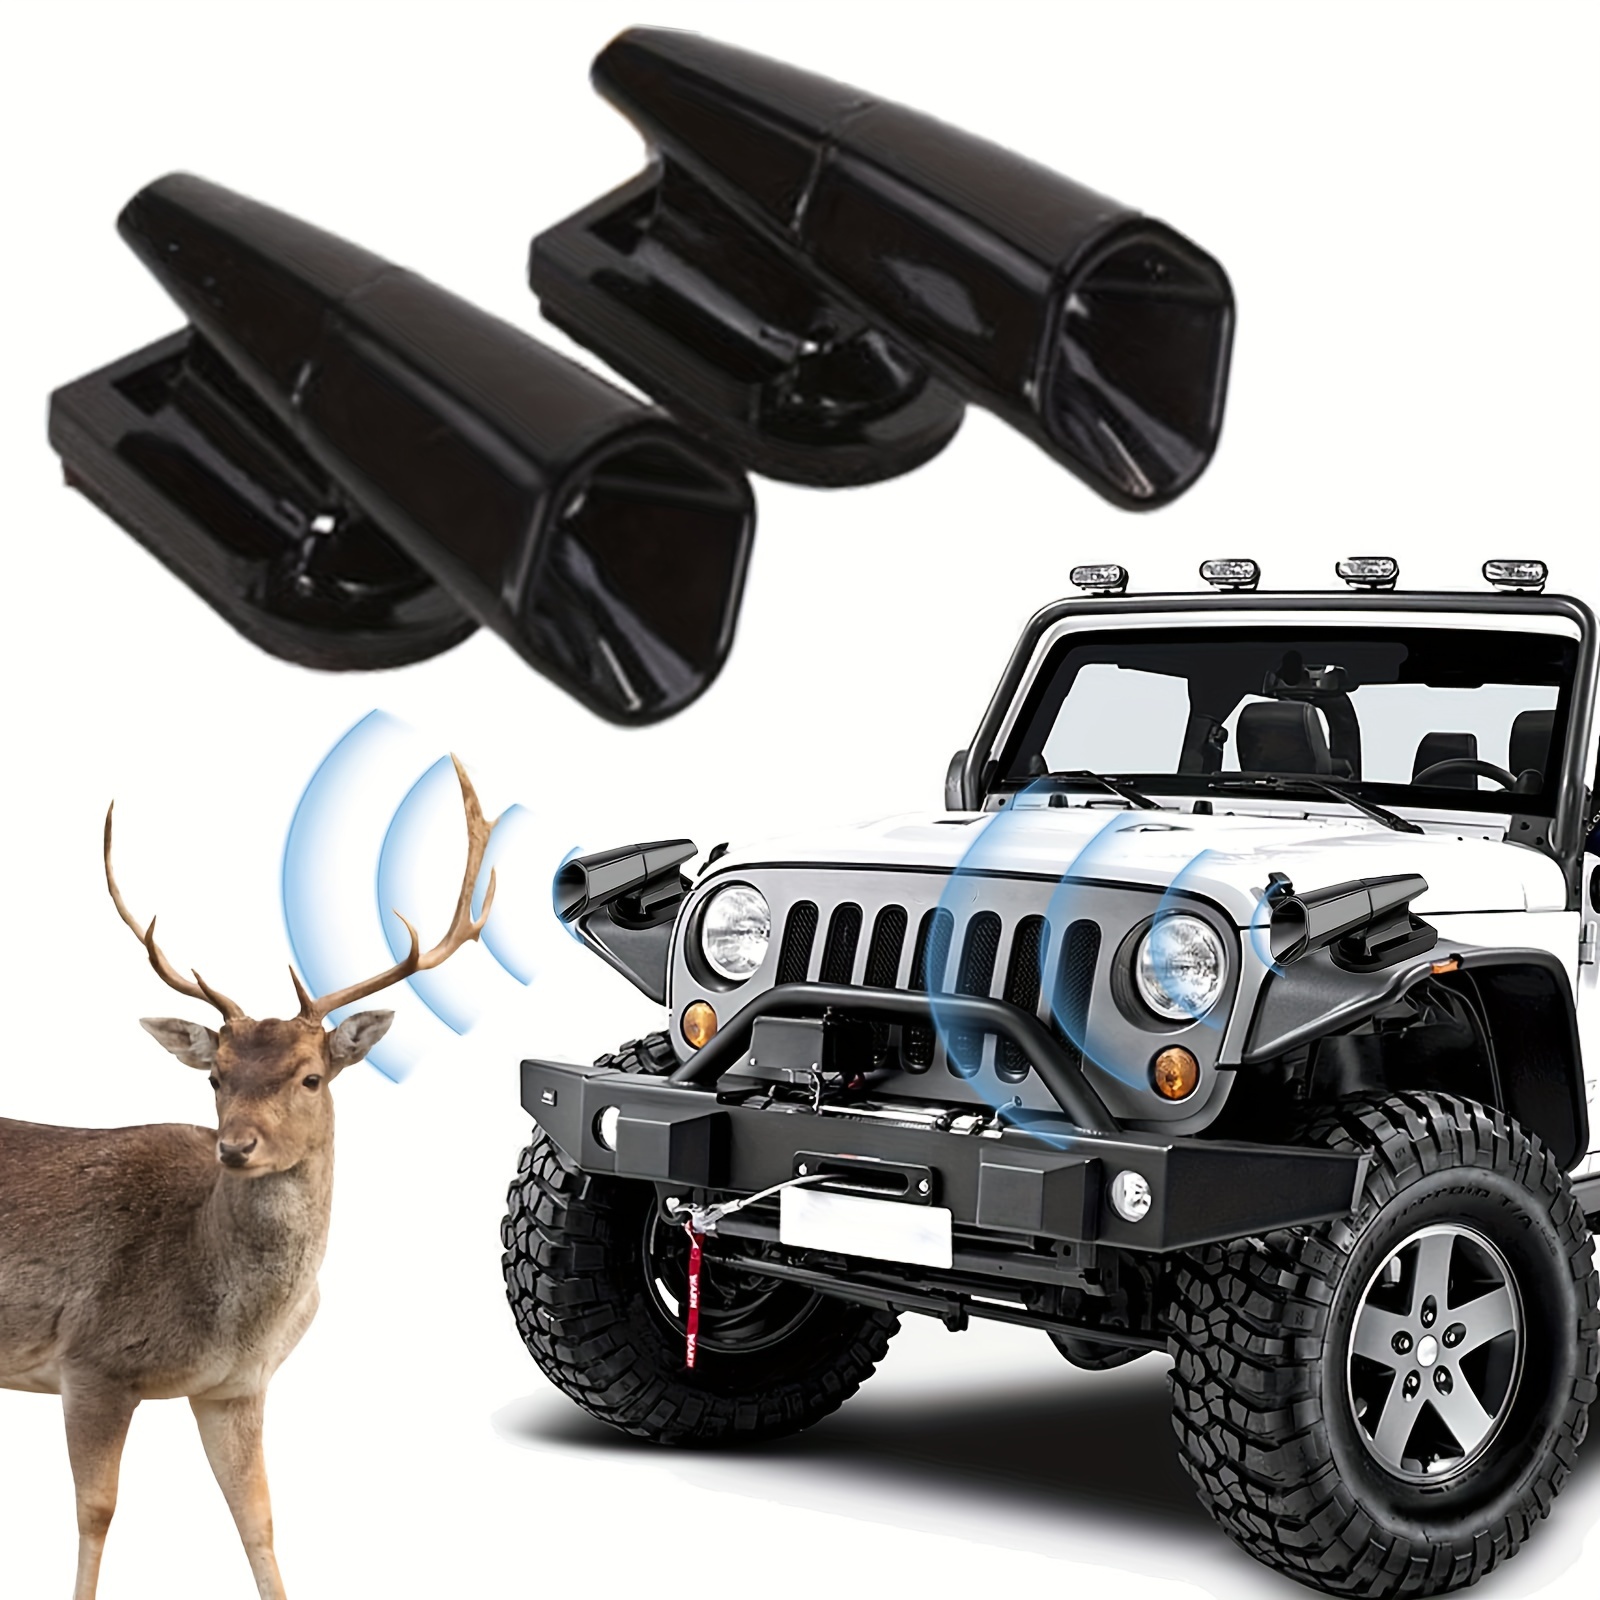  2Pcs Upgraded Deer Whistles For Car,Deer Horns For Vehicles,Deer  Whistles For Vehicles,Car SUV Truck Safety Accessories,Three-Horn :  Automotive